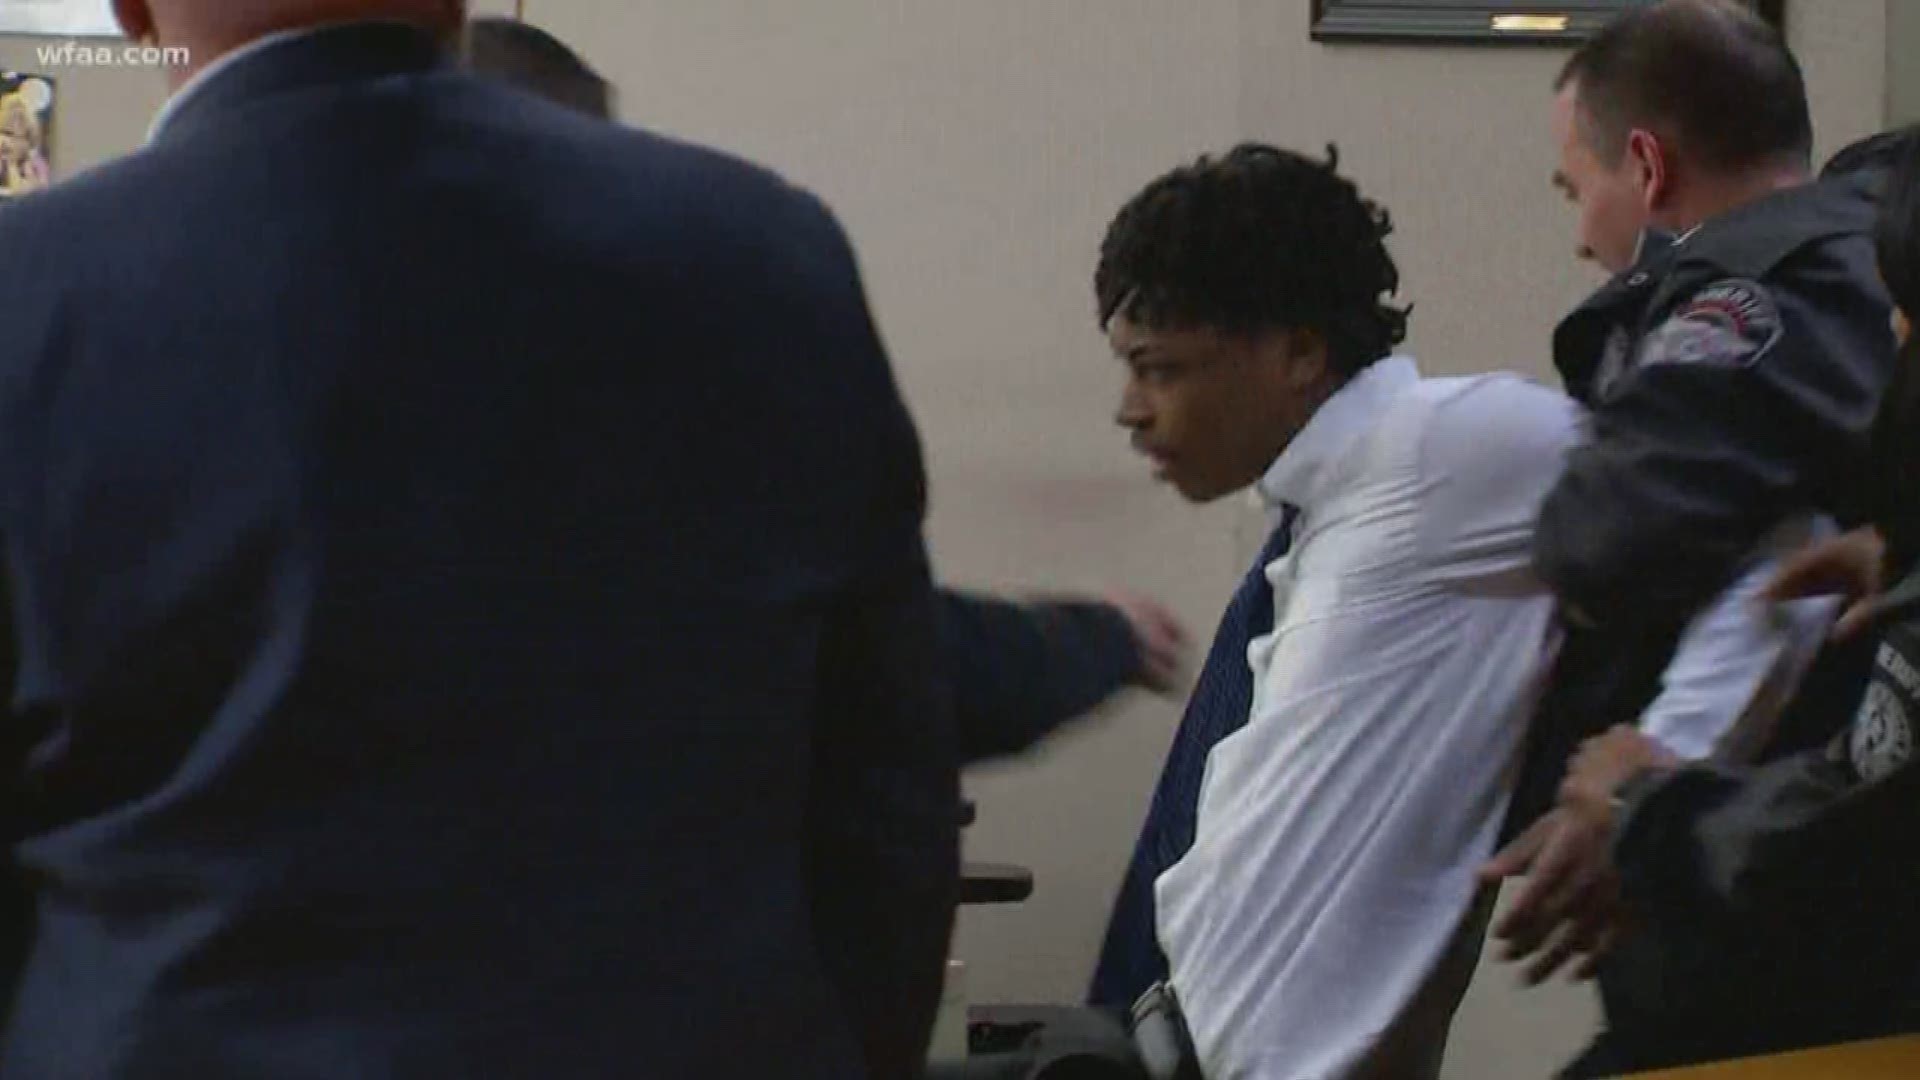 Desmond Jones, 24, was sentenced to 99 years in prison in Shavon's death. He had two outbursts during sentencing.